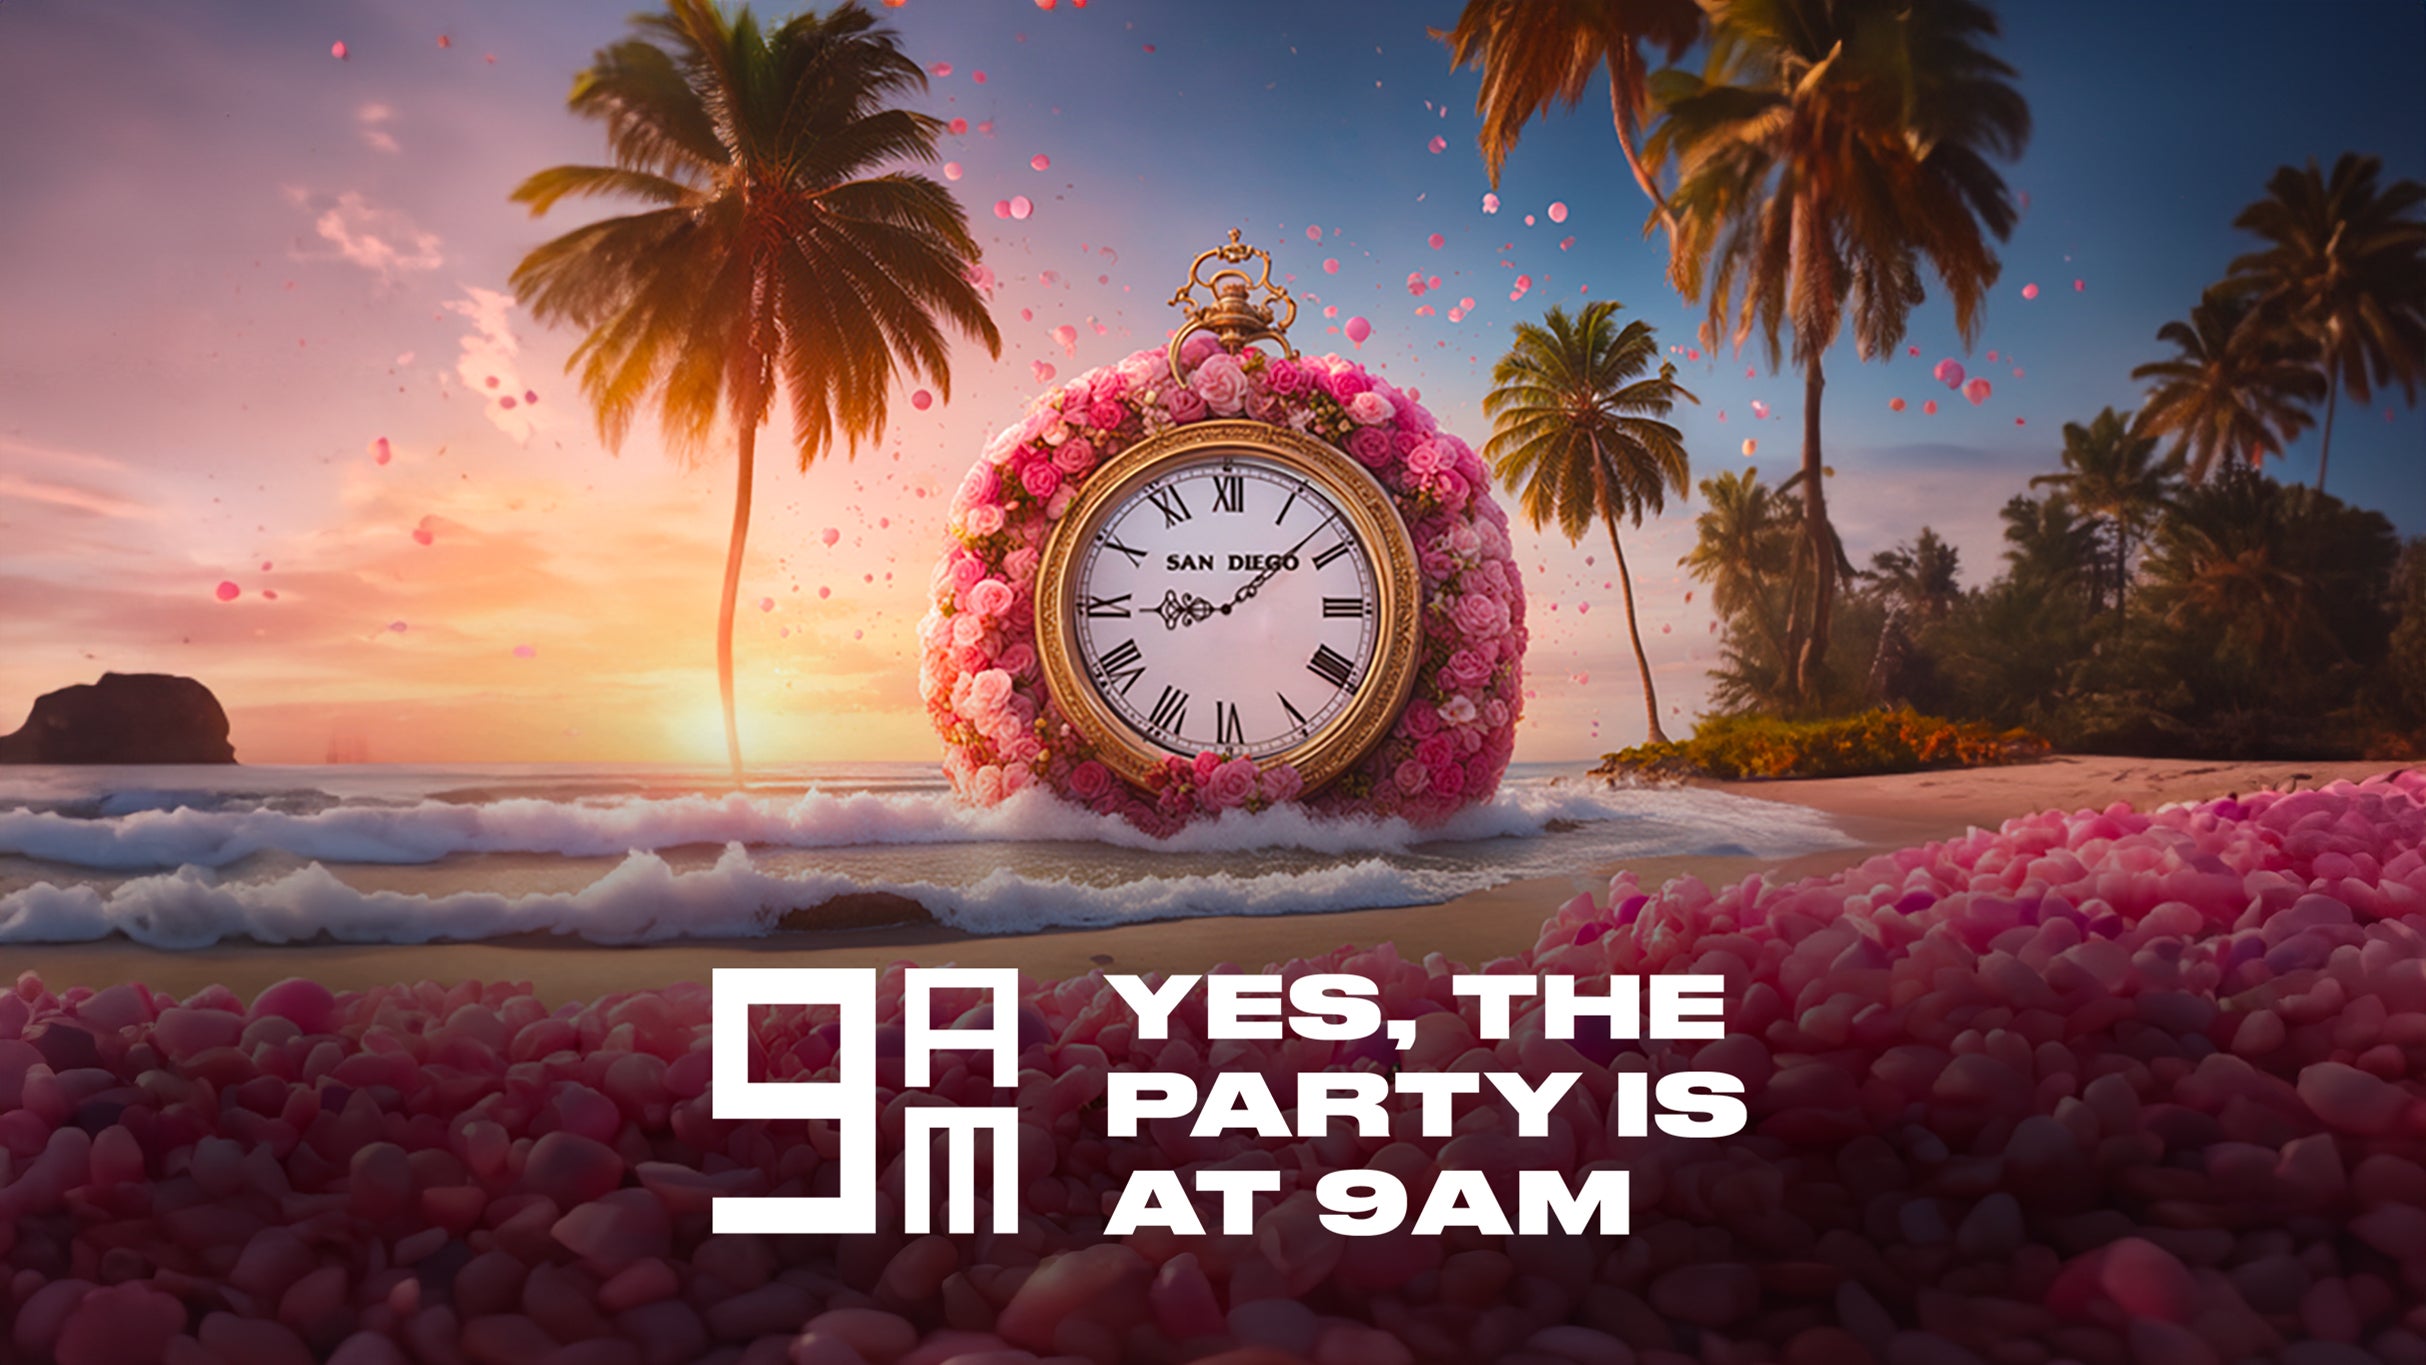 THE 9AM BANGER Presents: Rise and Rose'! Yes, The Party is at 9AM! 21+ in San Diego promo photo for Ticketmaster presale offer code